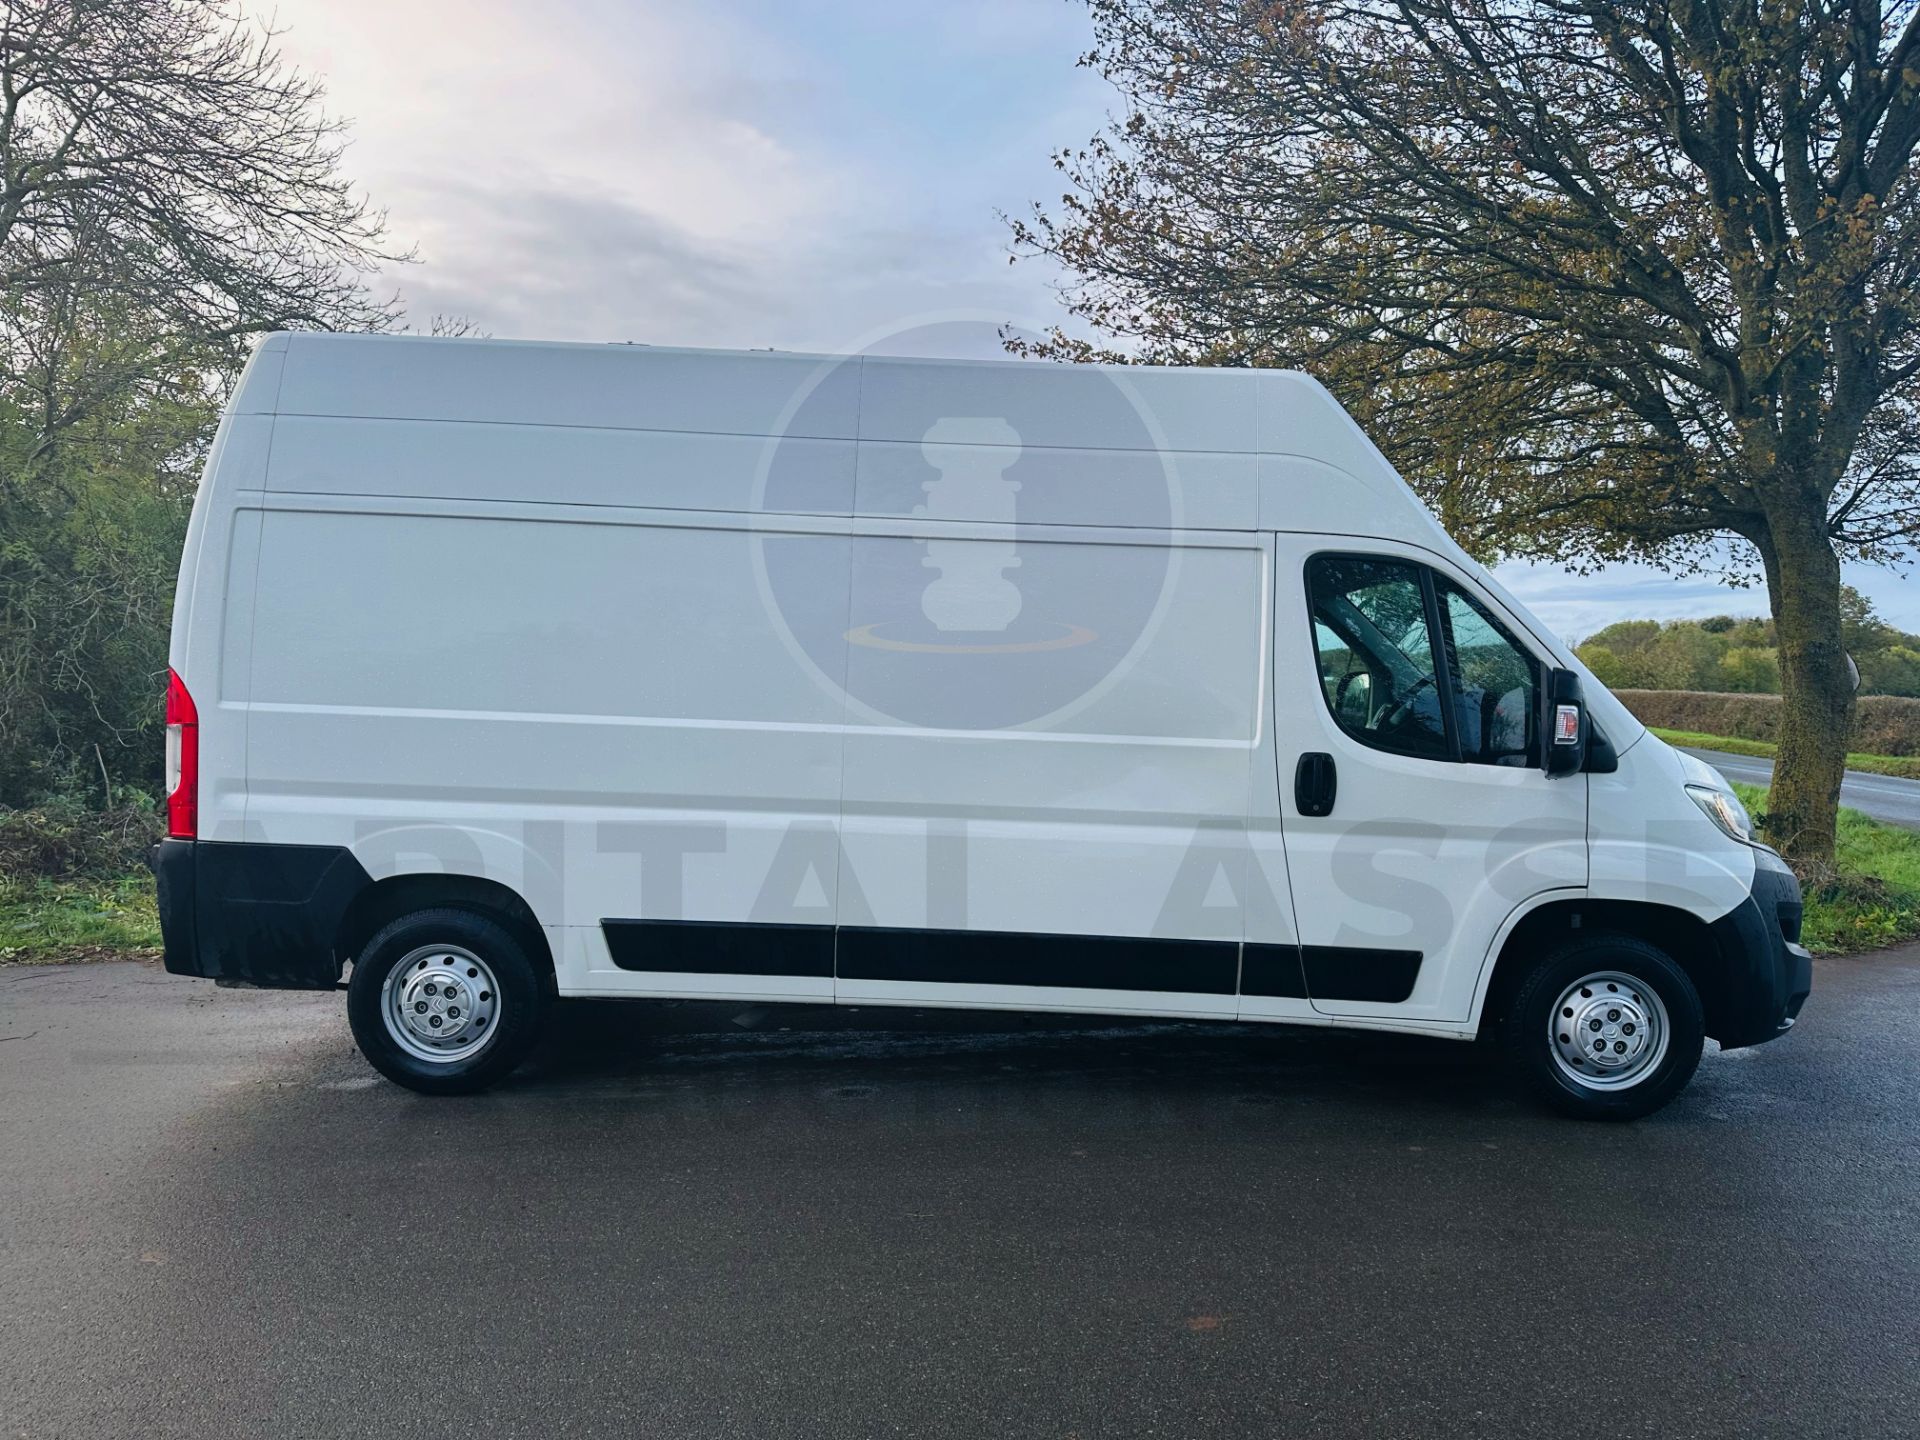 (ON SALE) CITROEN RELAY *ENTERPRISE EDITION* LWB EXTRA HI-ROOF (2021 -EURO 6) 2.2 BLUE HDI - 6 SPEED - Image 9 of 27